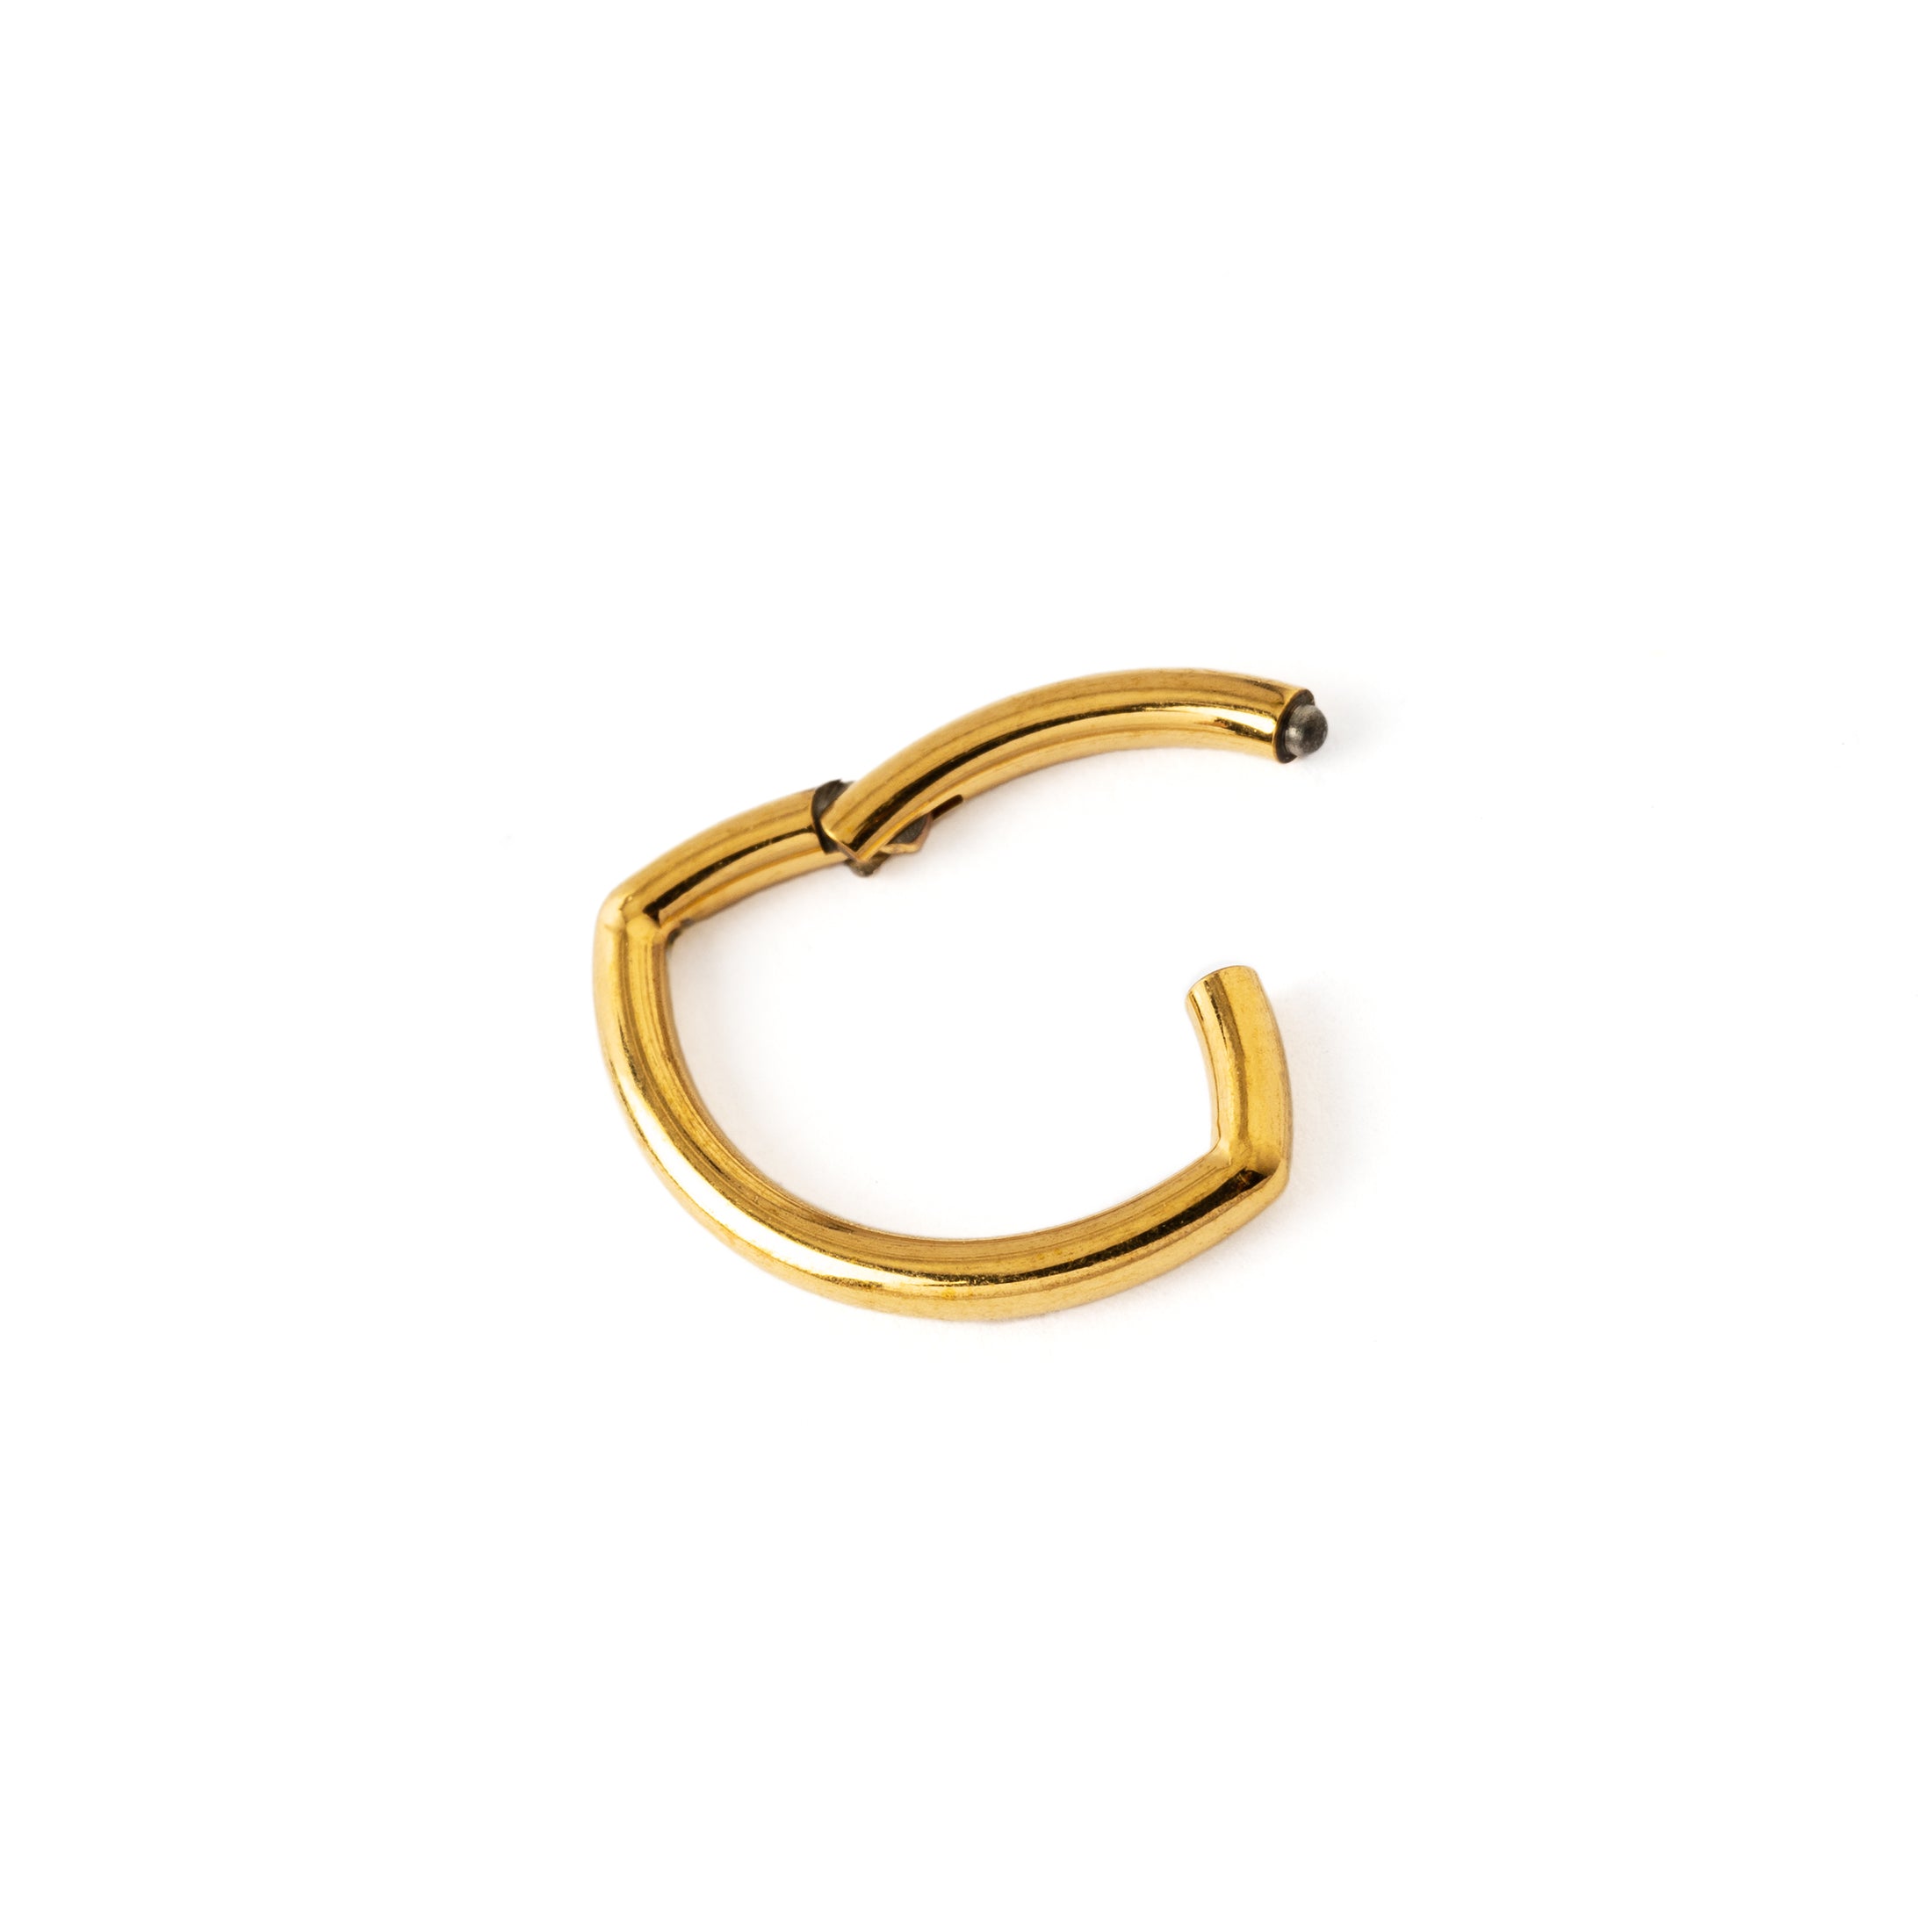 Golden surgical steel Oval Clicker Ring hinged segment view